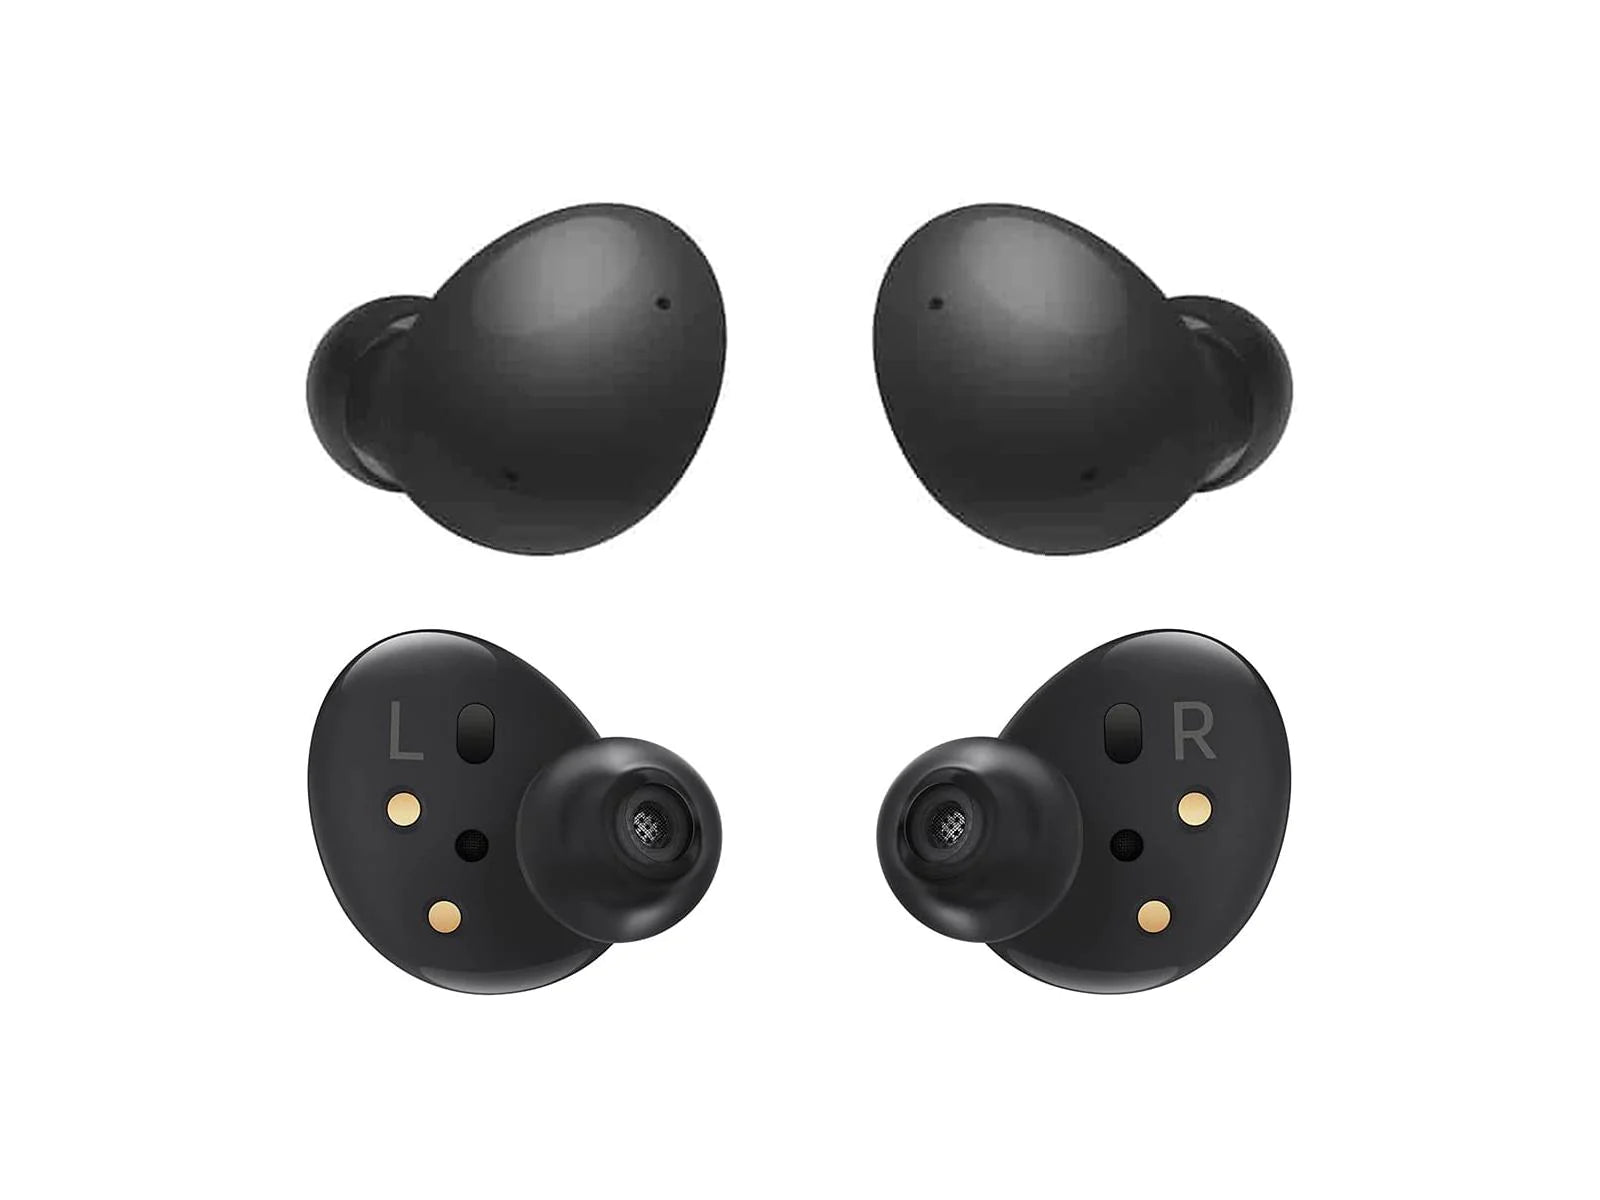  Samsung Galaxy Buds 2 Left And Right